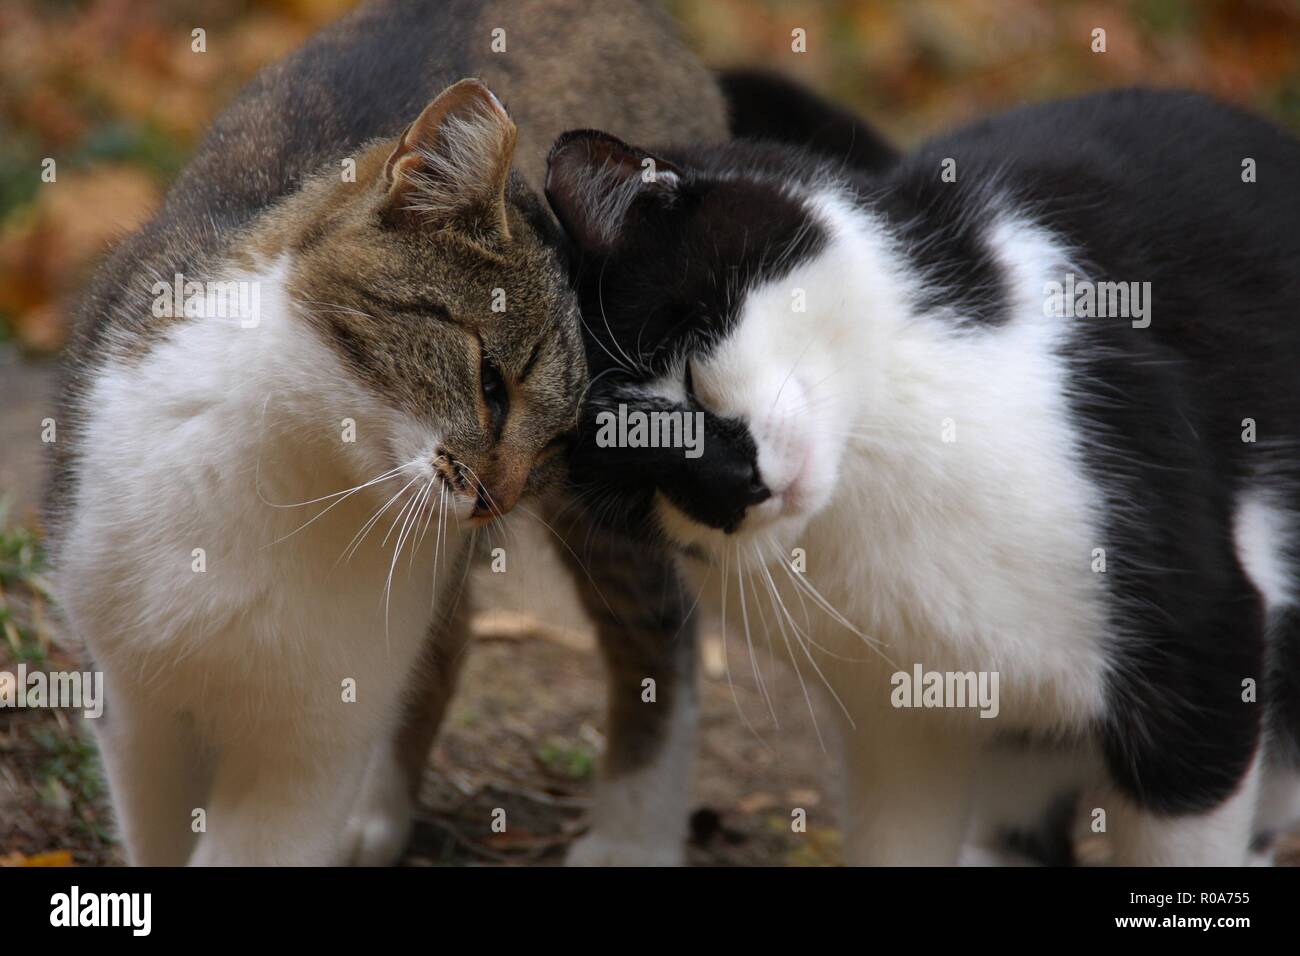 Two cats that love each other Stock Photo